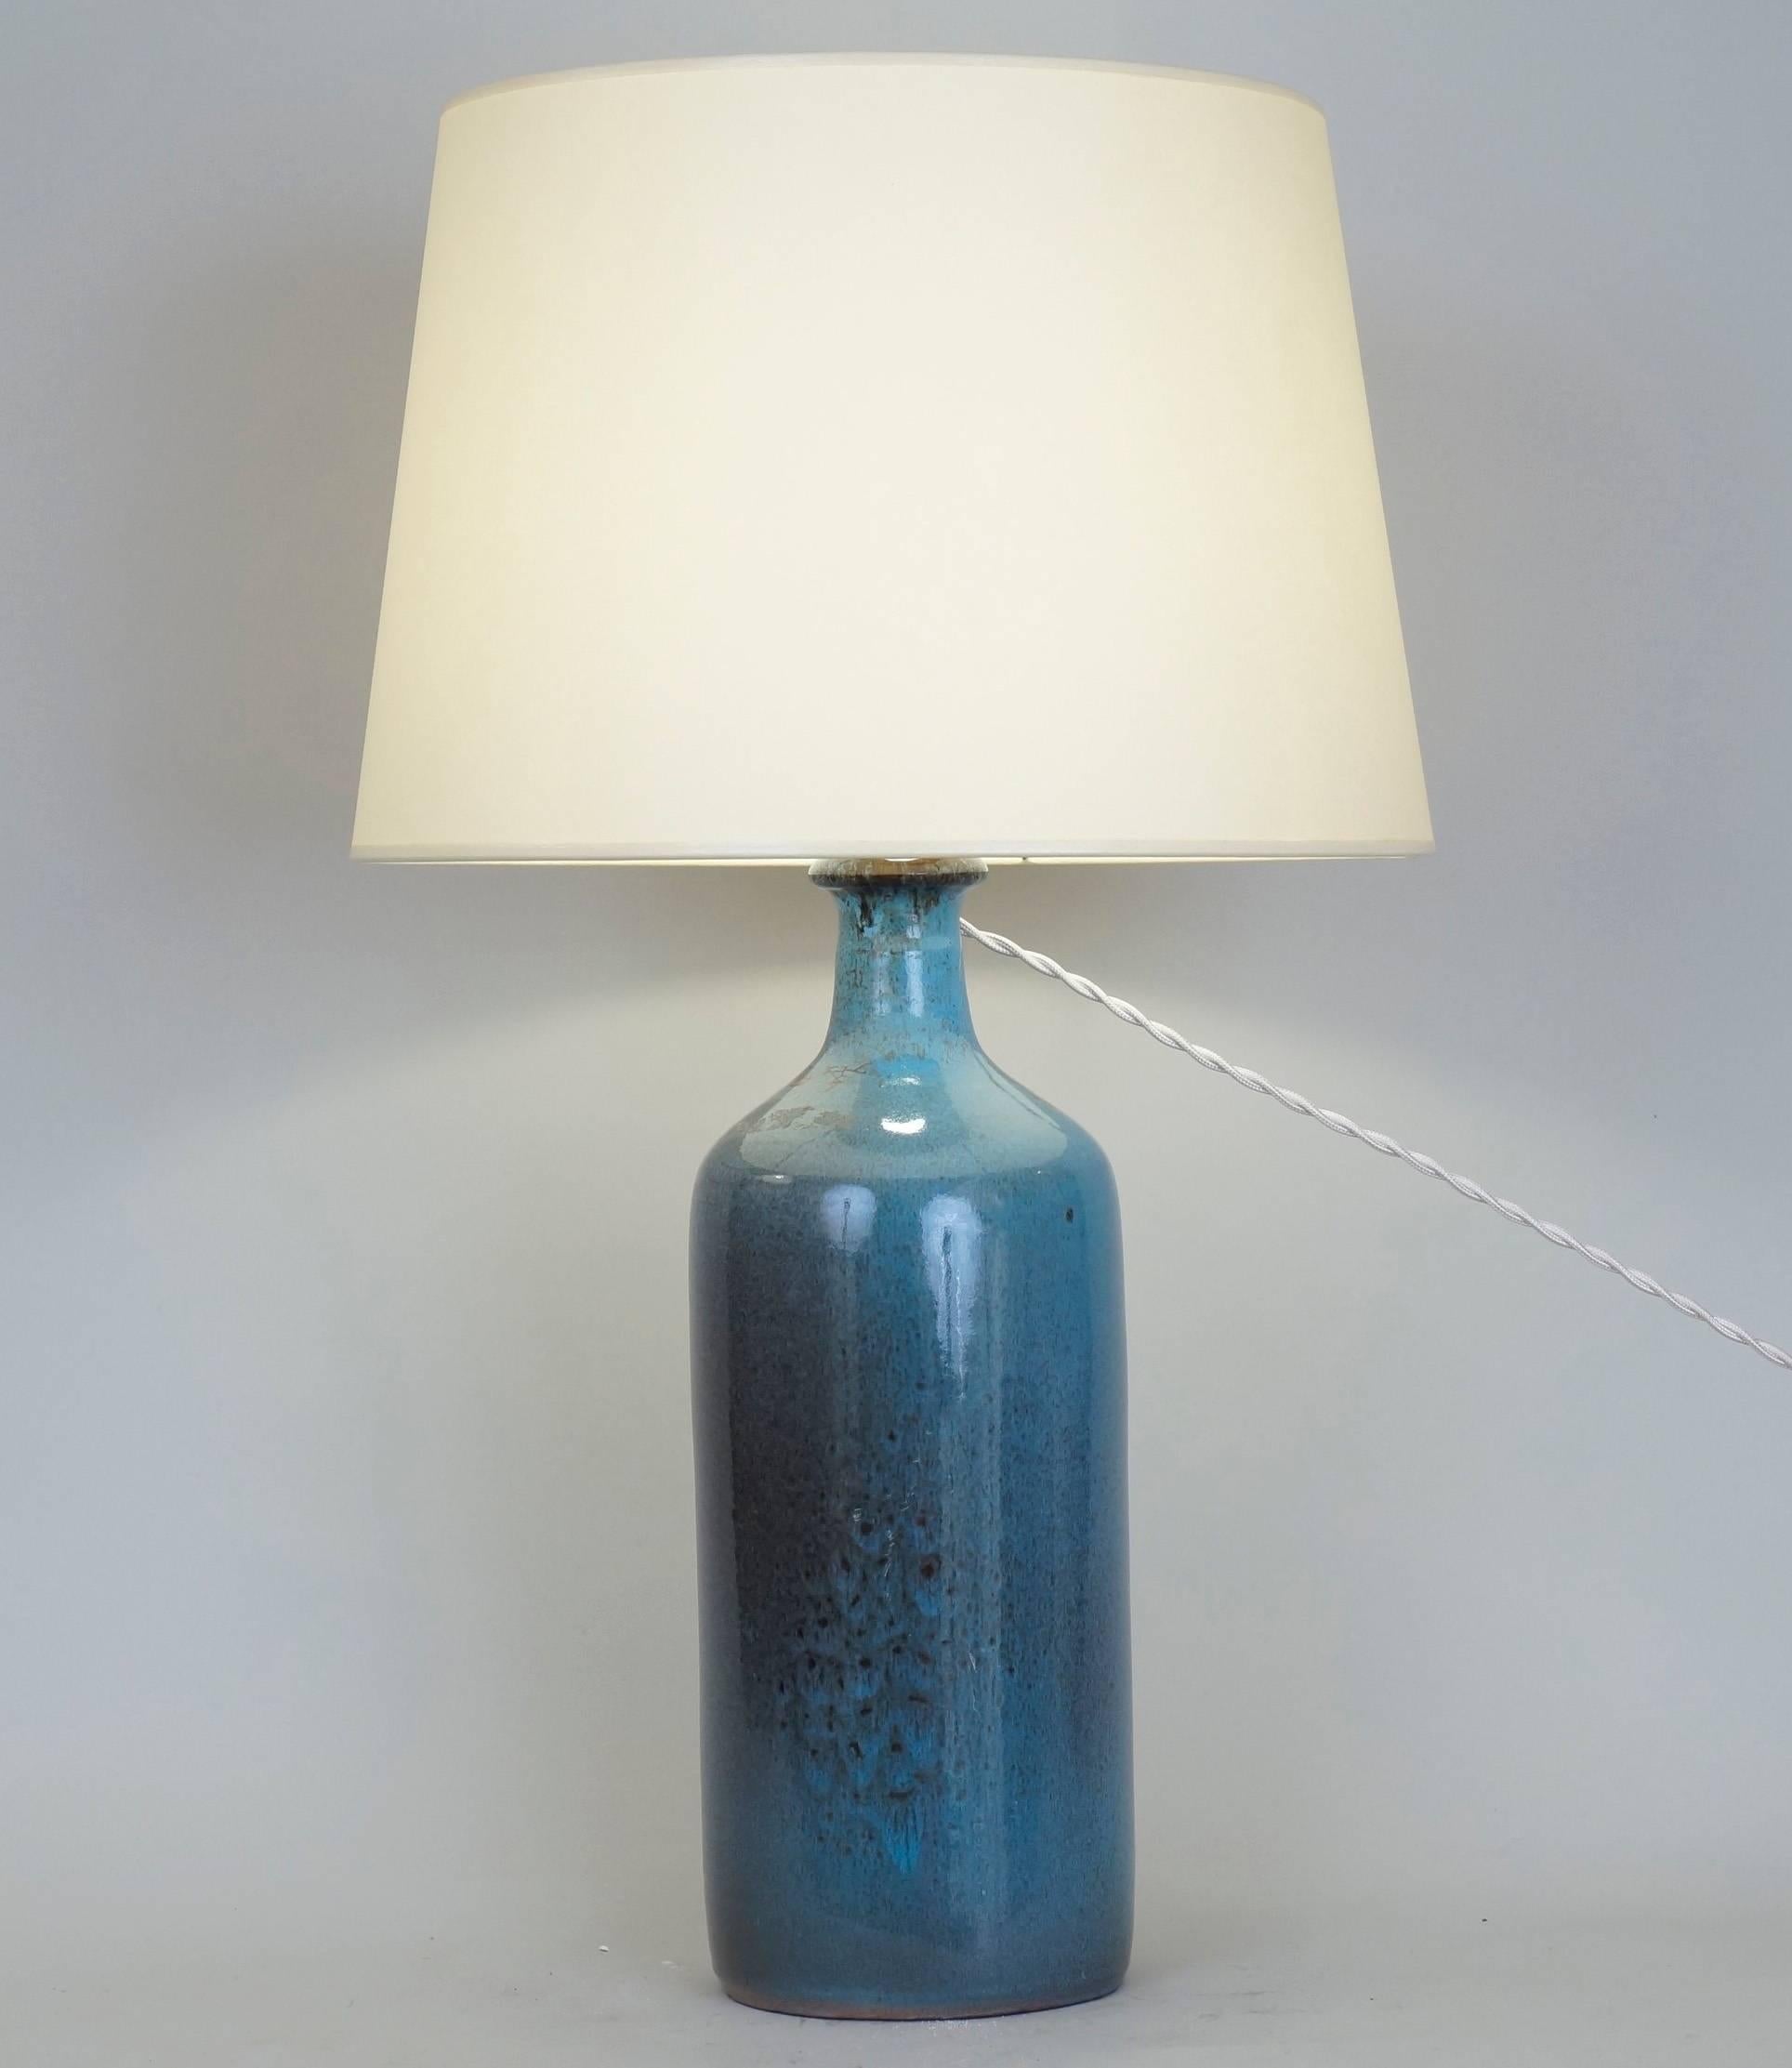 Blue satin ceramic table lamp.
Custom-made fabric lampshade.
Rewired with twisted silk cord.
US standard plug on request.
Ceramic body height: 34 cm - 13.4 in.
Height with lampshade: 56 cm - 22 in.
 